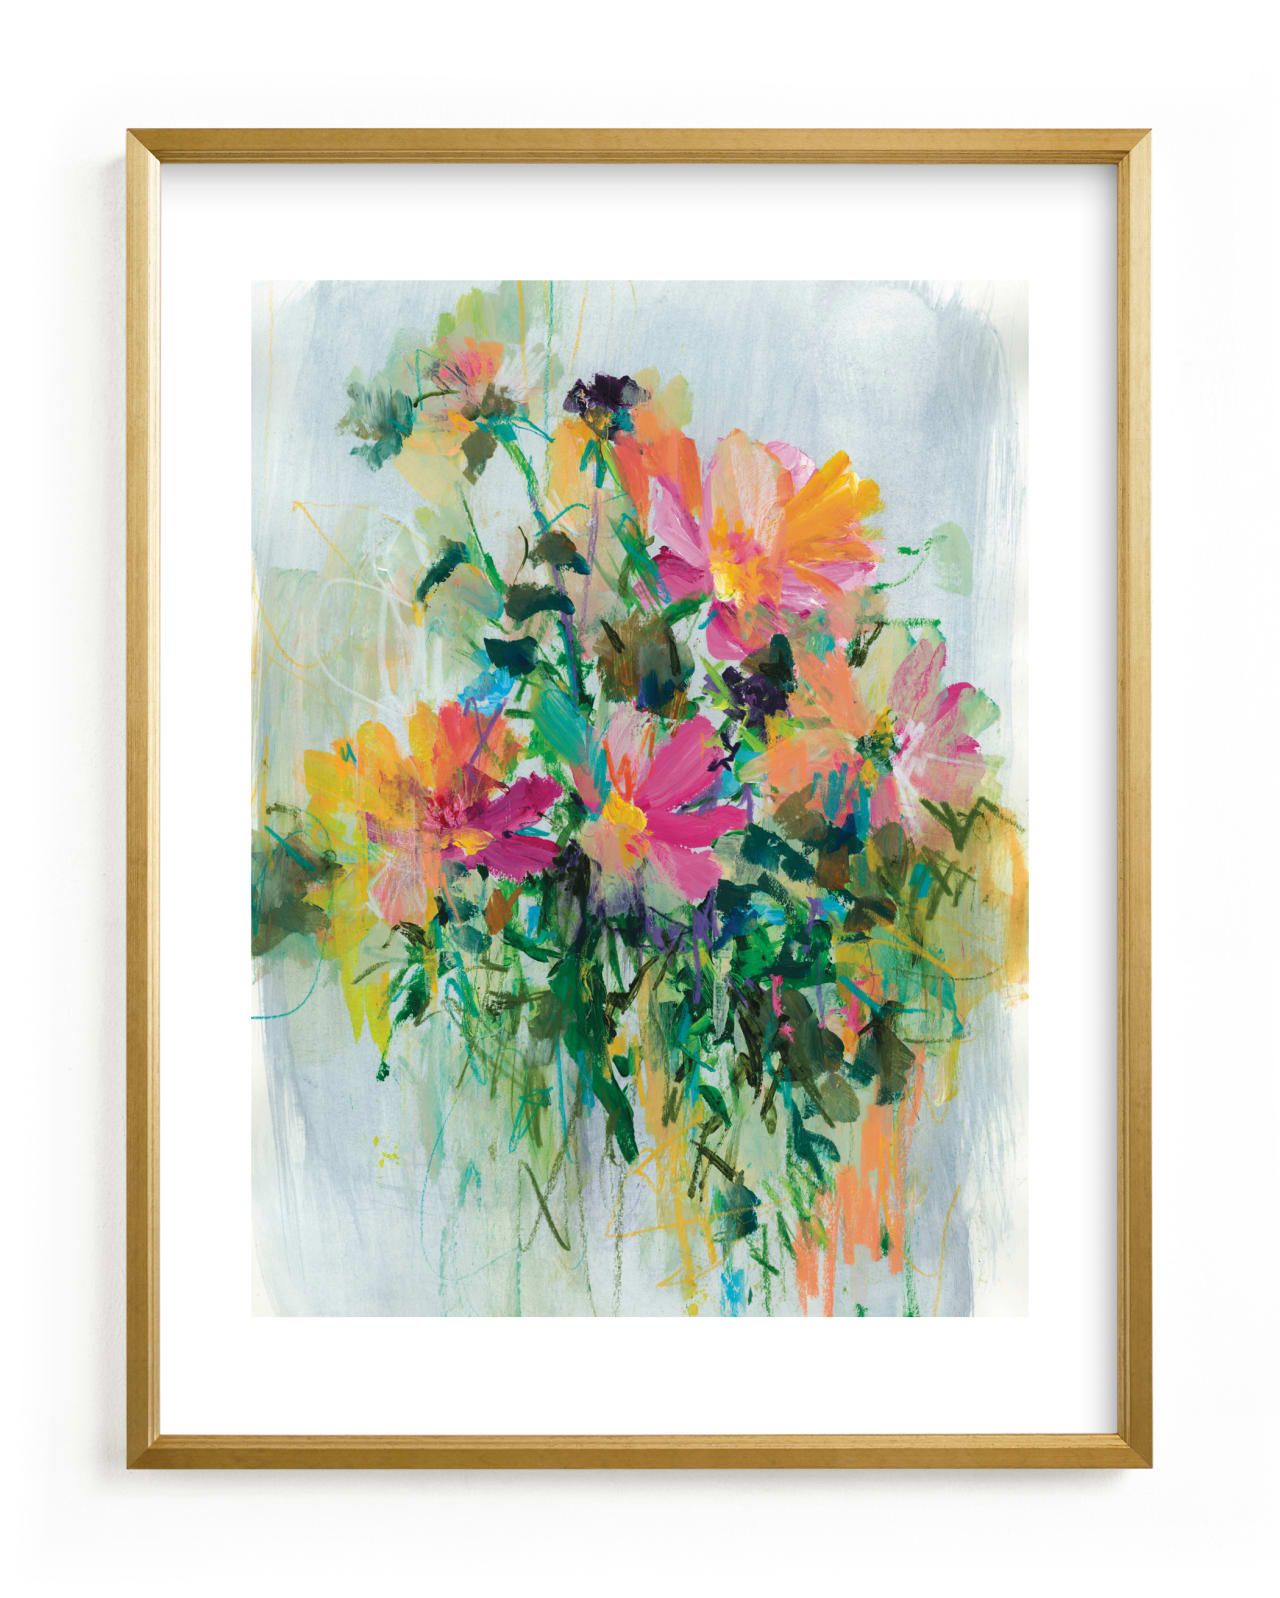 "Flowering" - Painting Limited Edition Art Print by Sonal Nathwani. | Minted